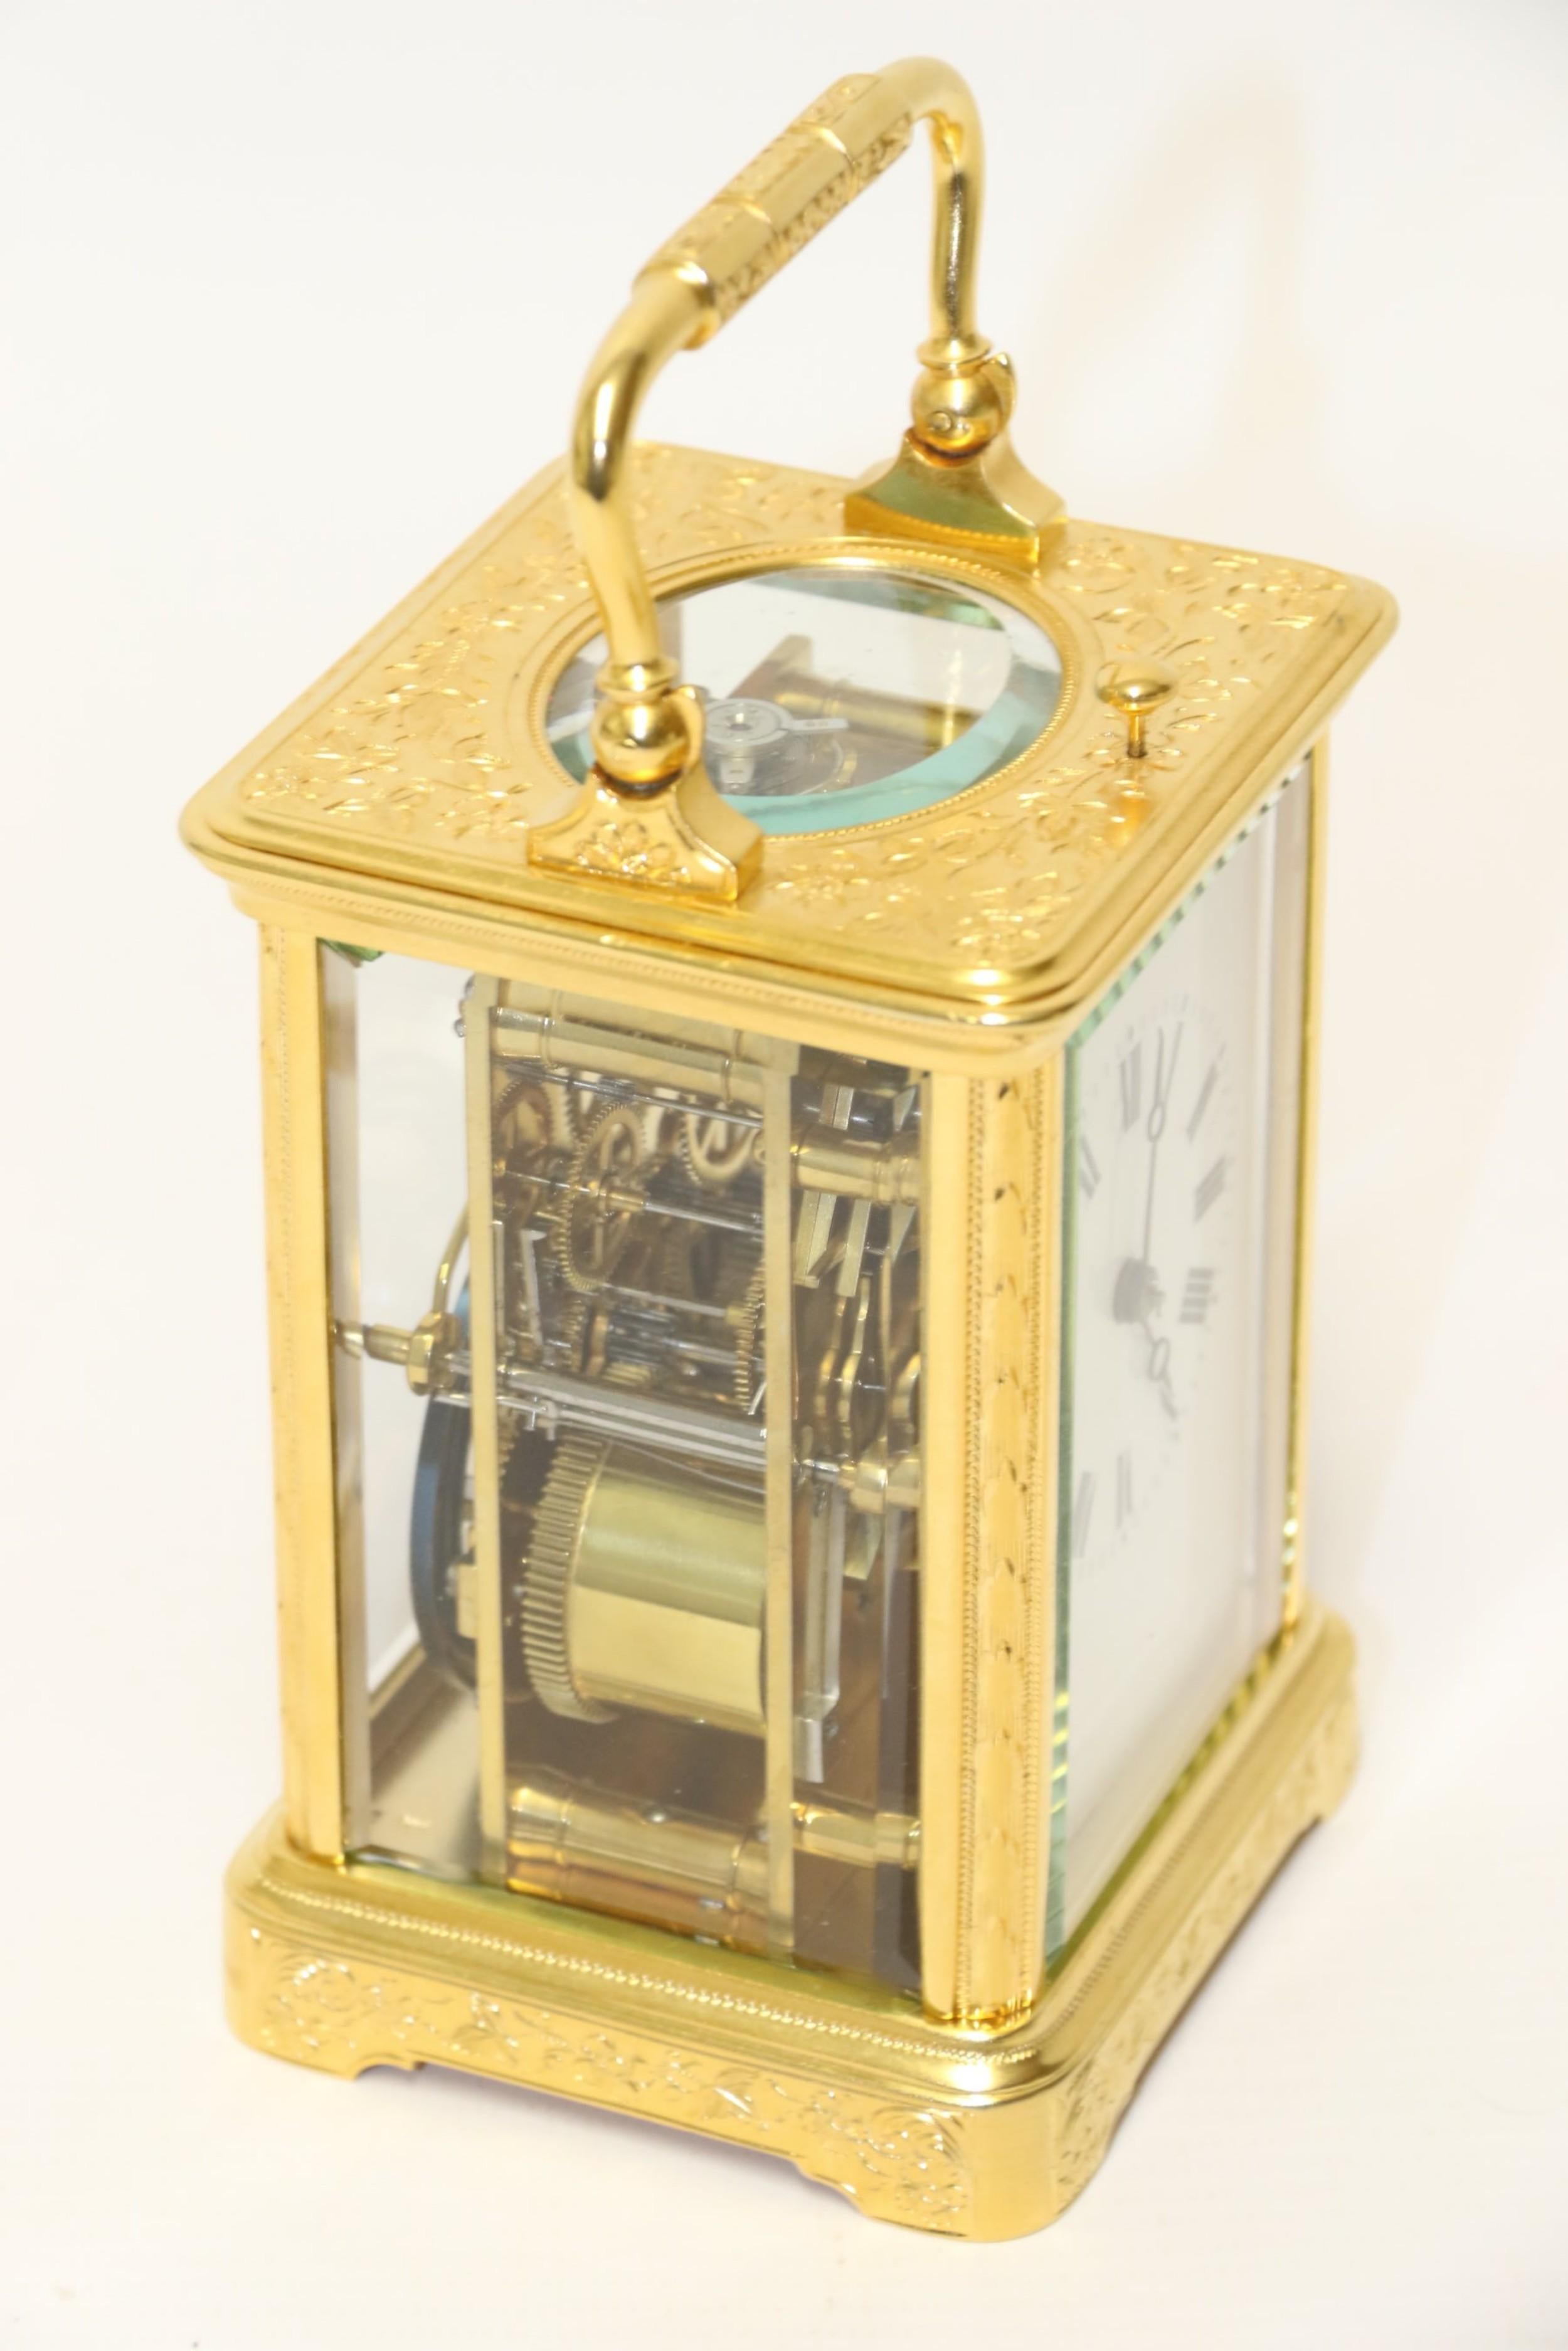 This beautiful carriage clock dates to circa 1900 and made in France.

The clock has an a eight day striking and repeating movement (escapement replaced at some point) and is housed in a fine gilt case with detailed flowers and leaves hand